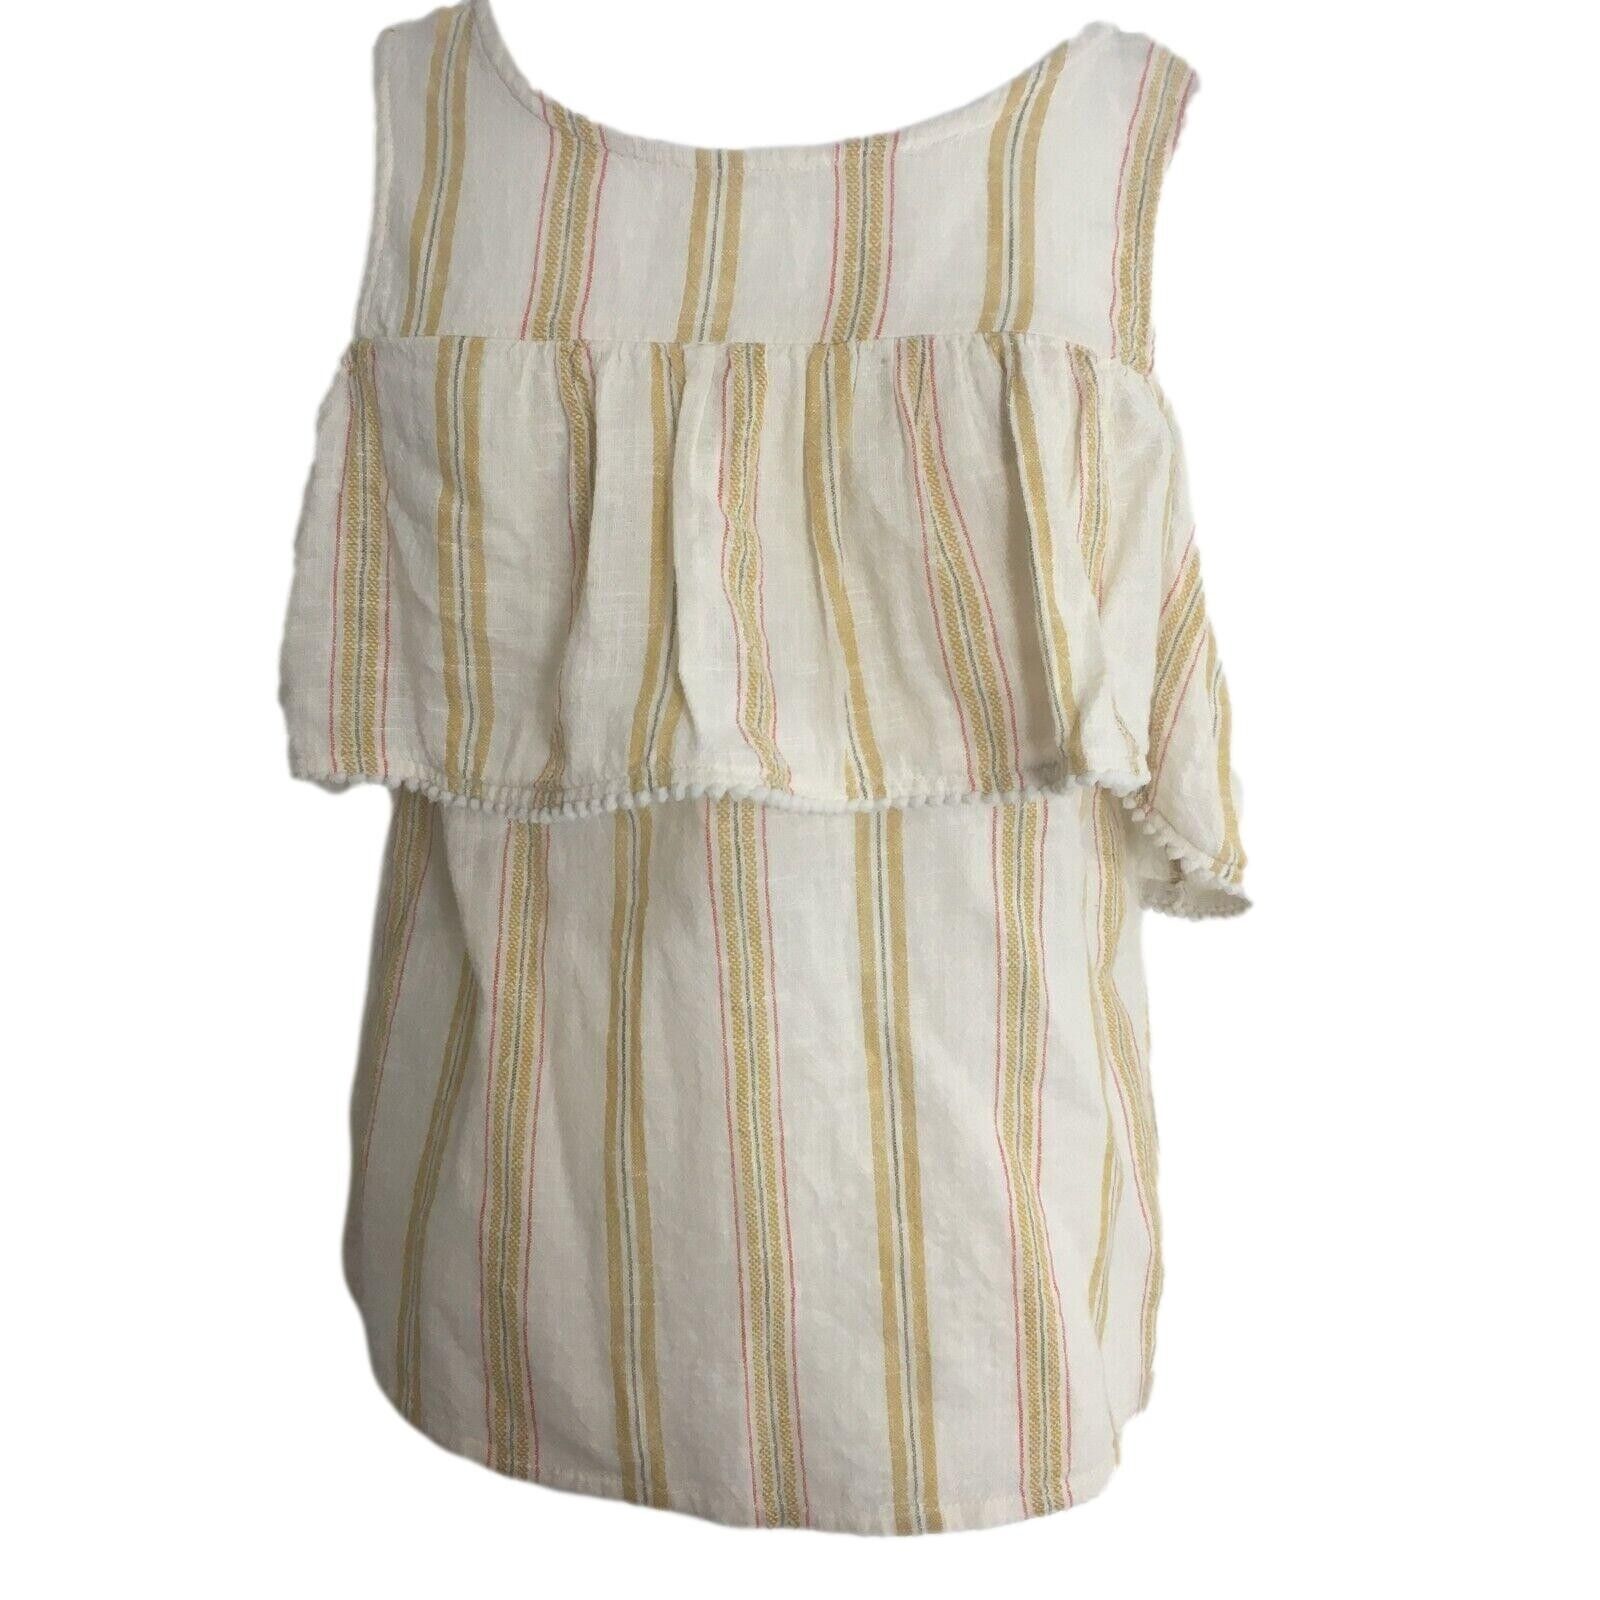 Primary image for Lauren Conrad Womens Shirt XS Red Gold Stripe Cotton Sleeveless Ruffle Top